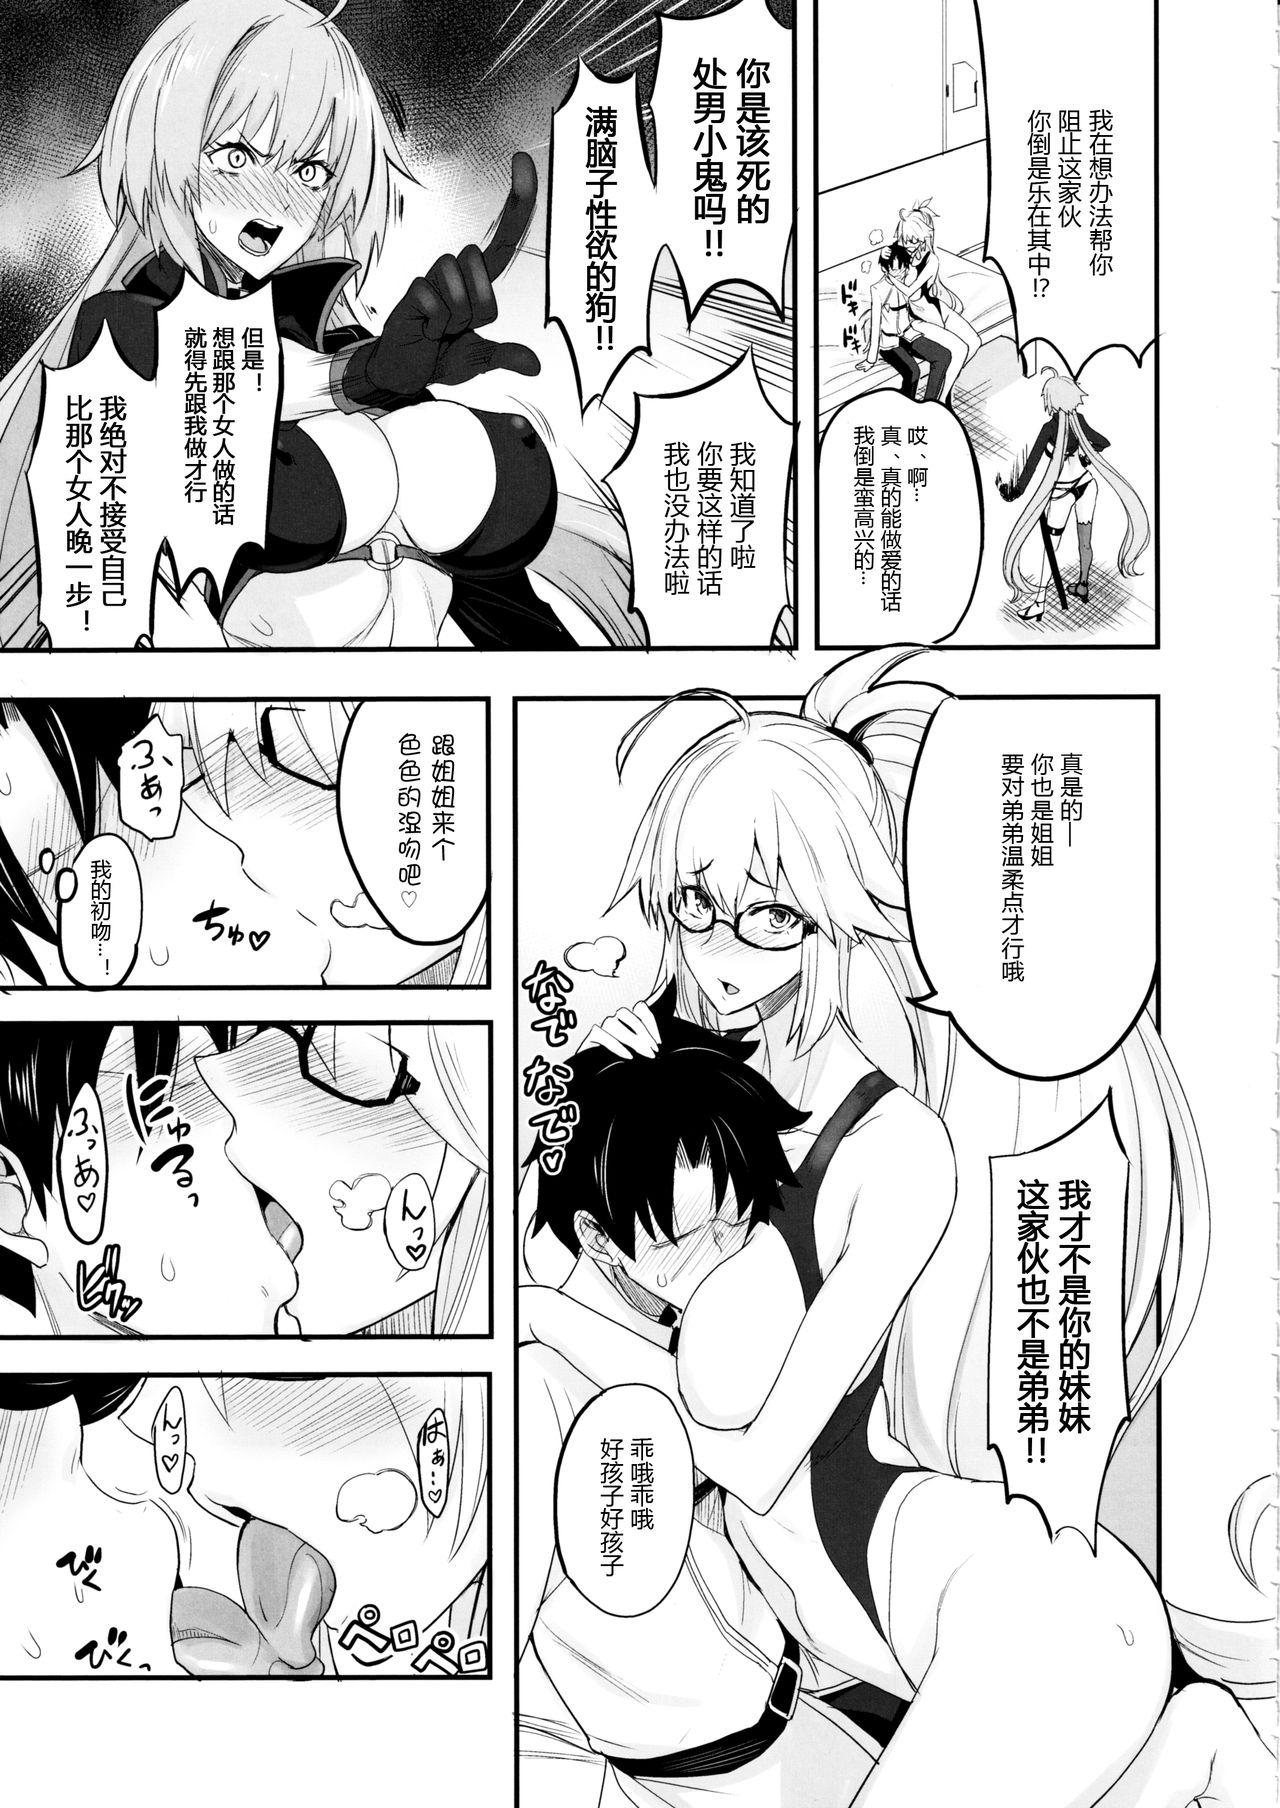 Phat Ass W Jeanne vs Master - Fate grand order Gay Pawn - Page 5